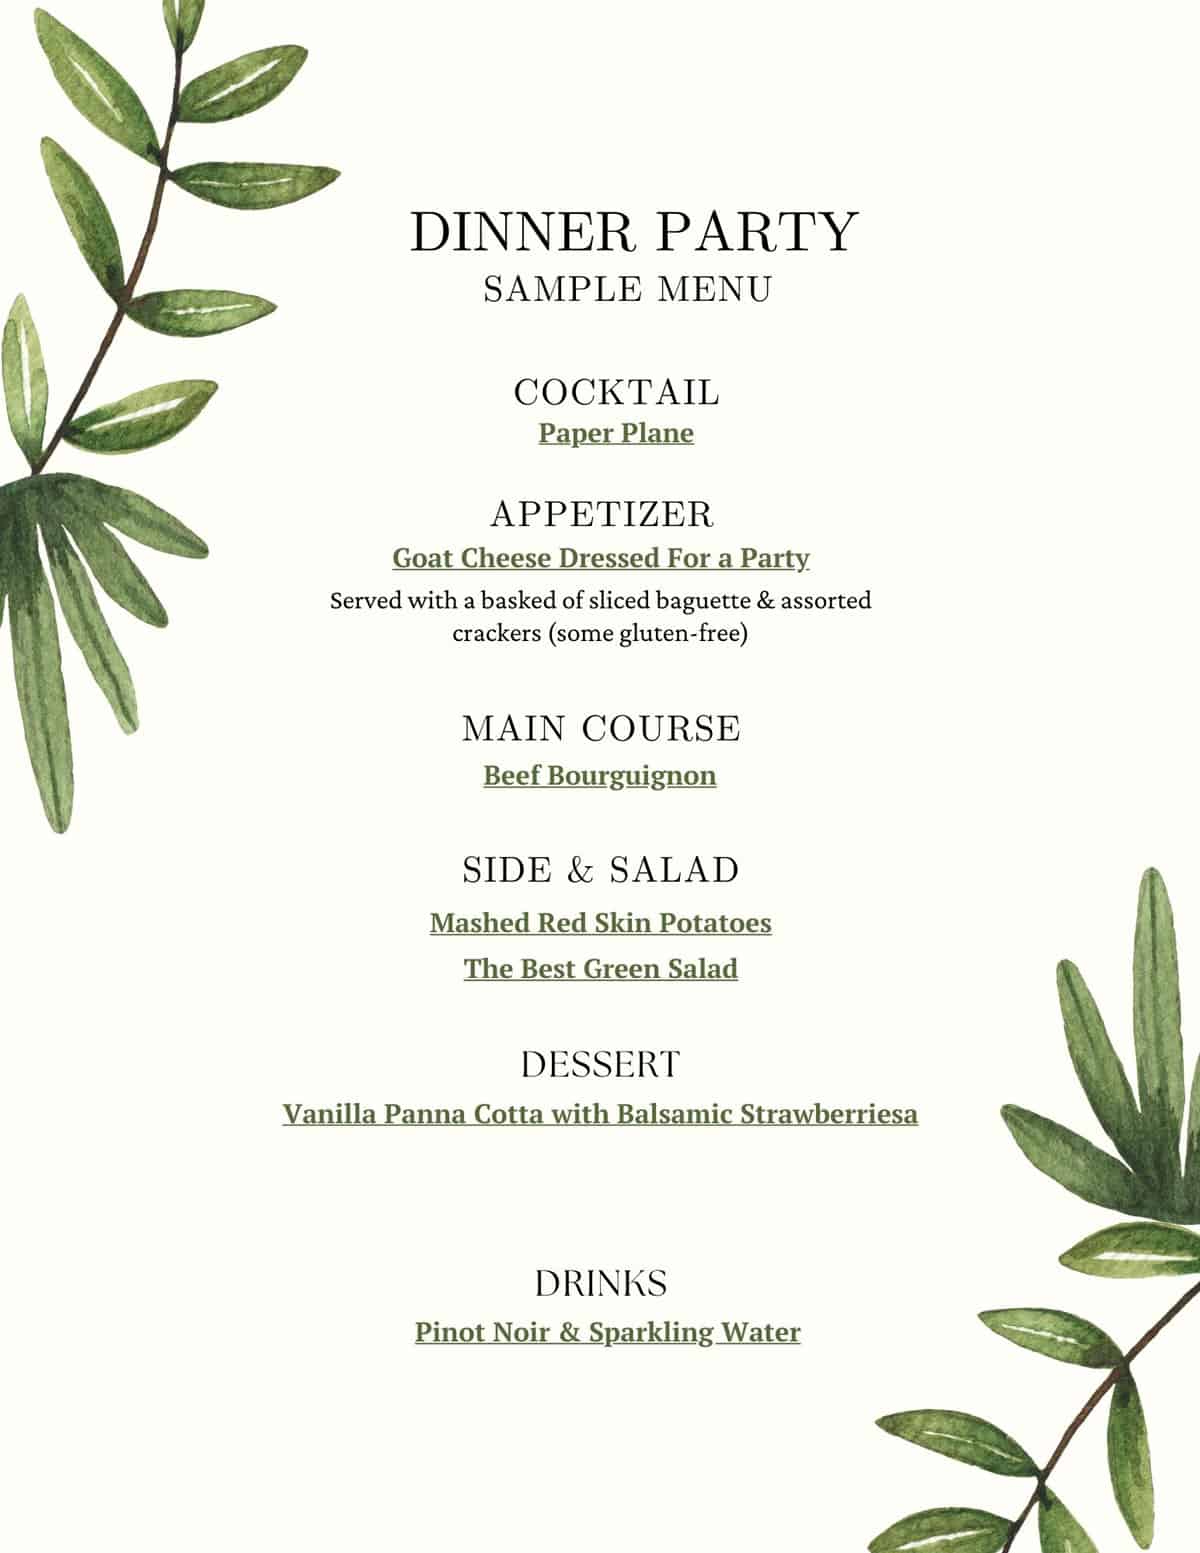 Elegant beige menu with decorative green leaves on either side, listing each course for a sit down dinner.